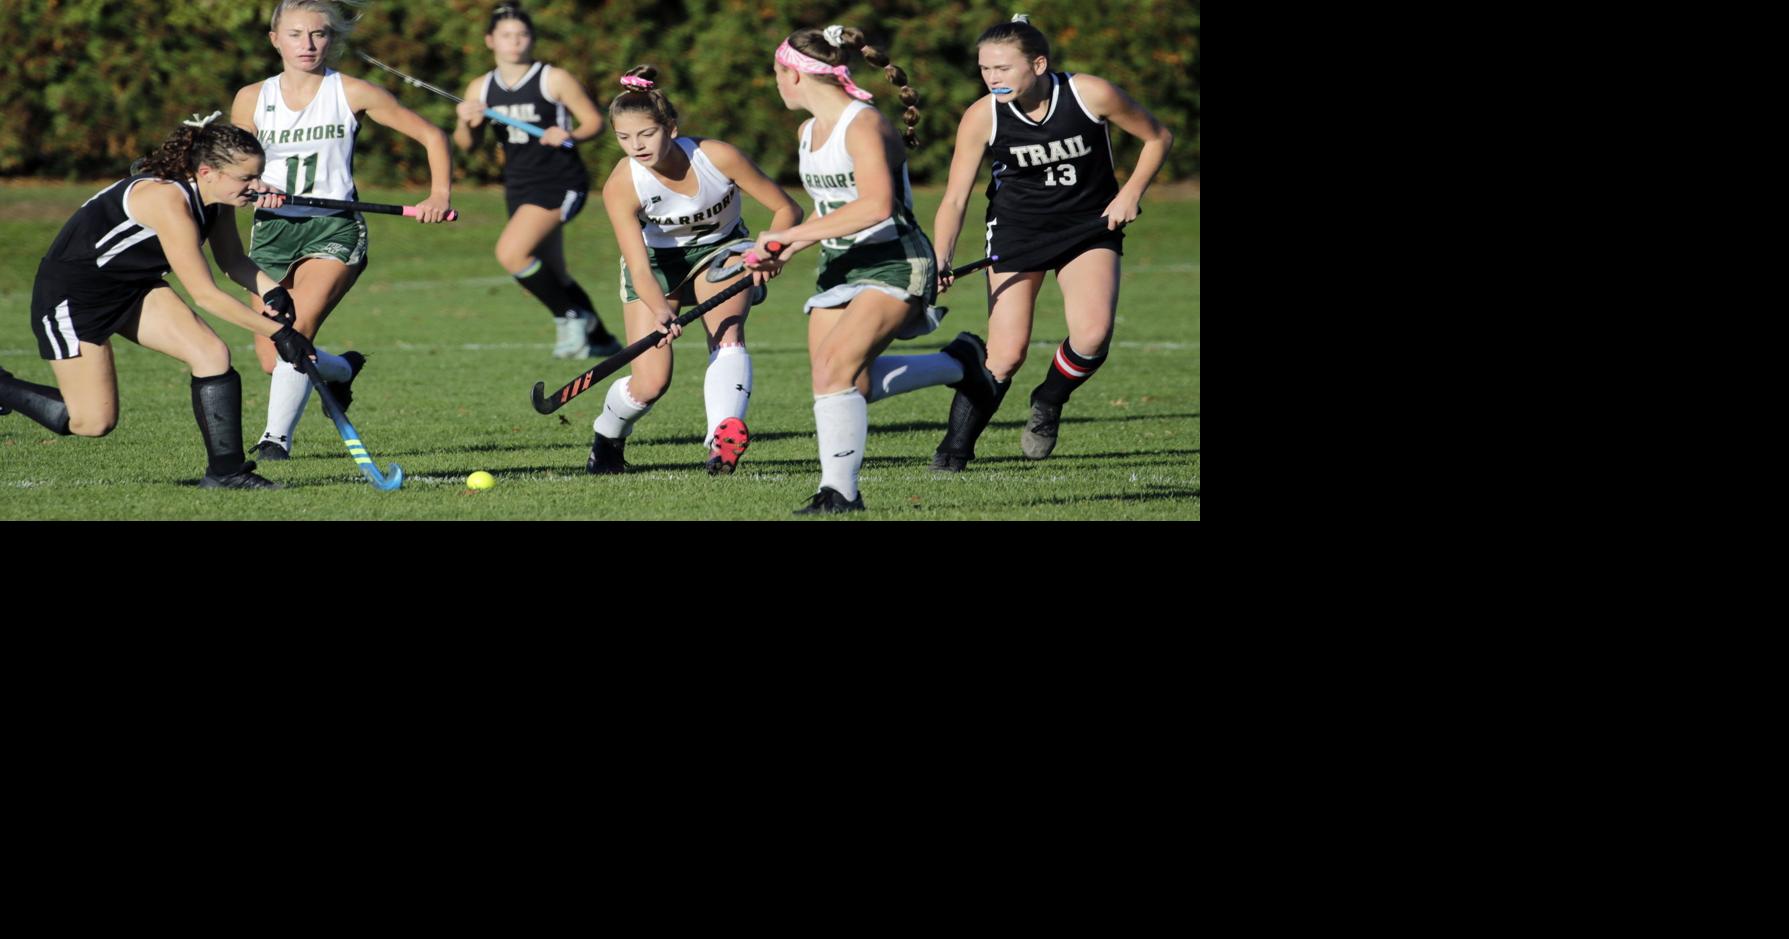 PIAA FIELD HOCKEY Wyoming Area excited, ready for state semifinal